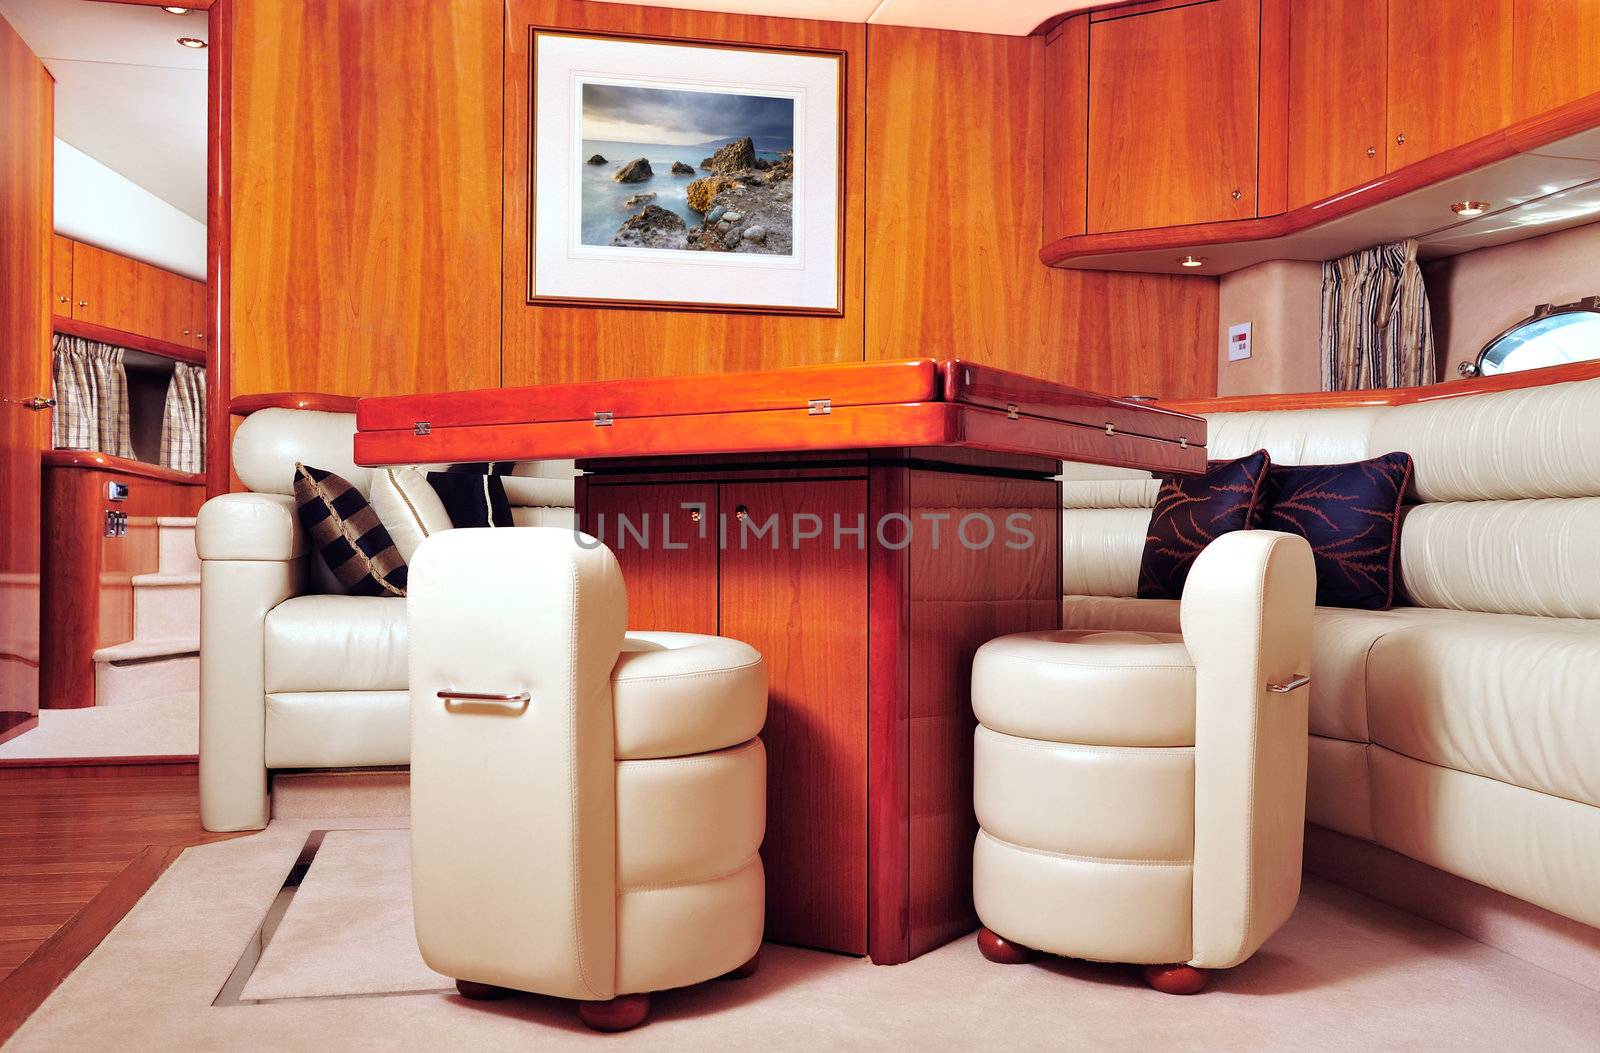 Interior picture of a luxury yacht